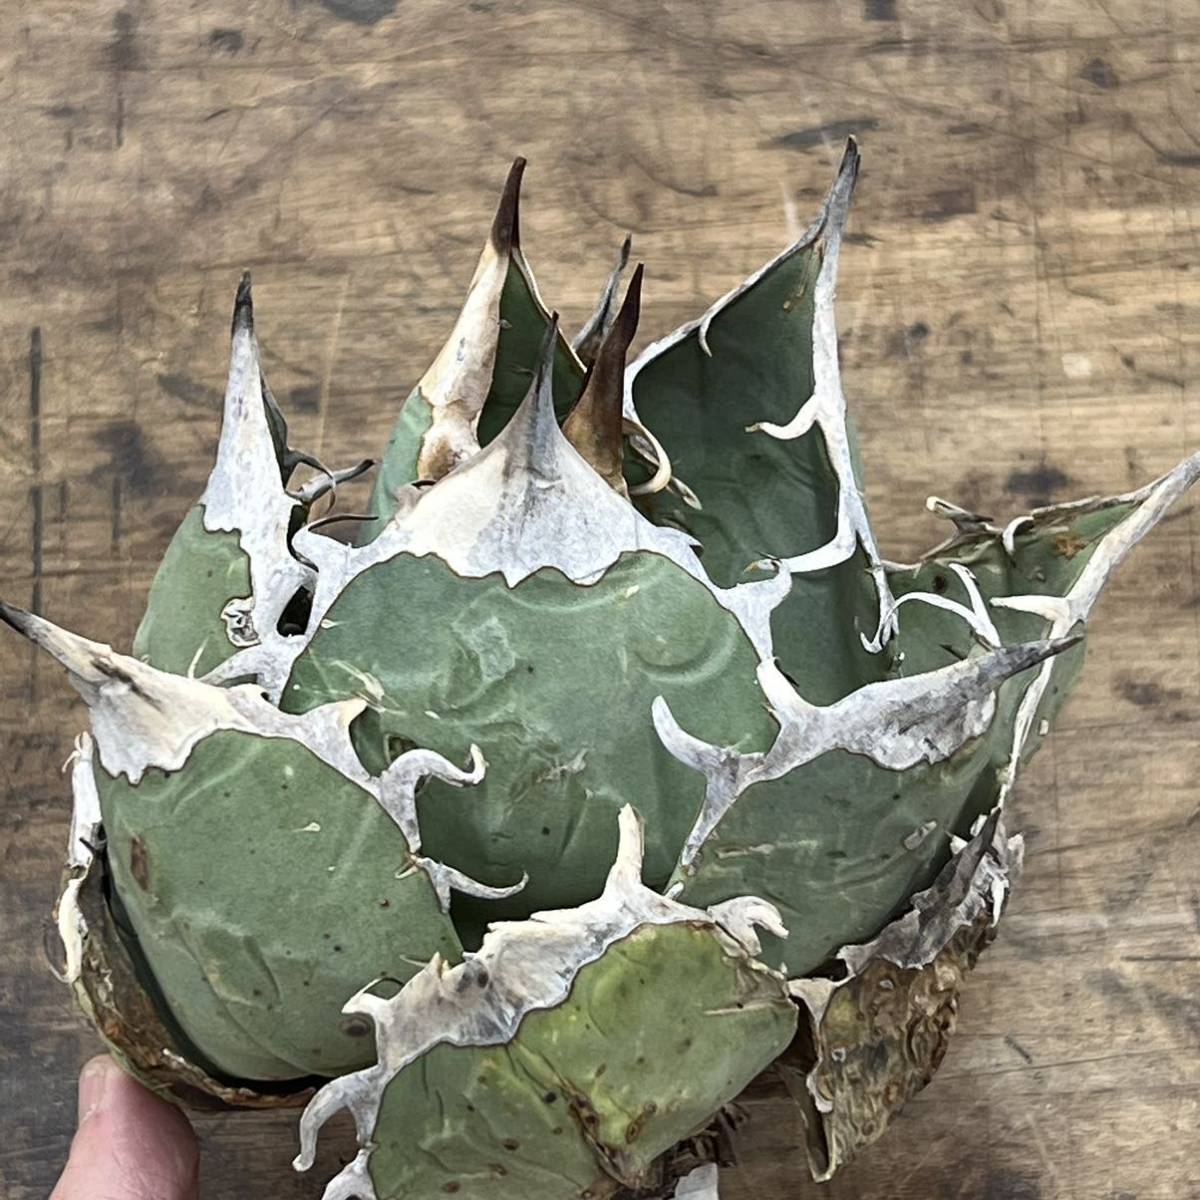 Agave Oteroi Mexico / アガベ オテロイ オアハカ M230 【KOBE AGAVE SHOP】_画像2